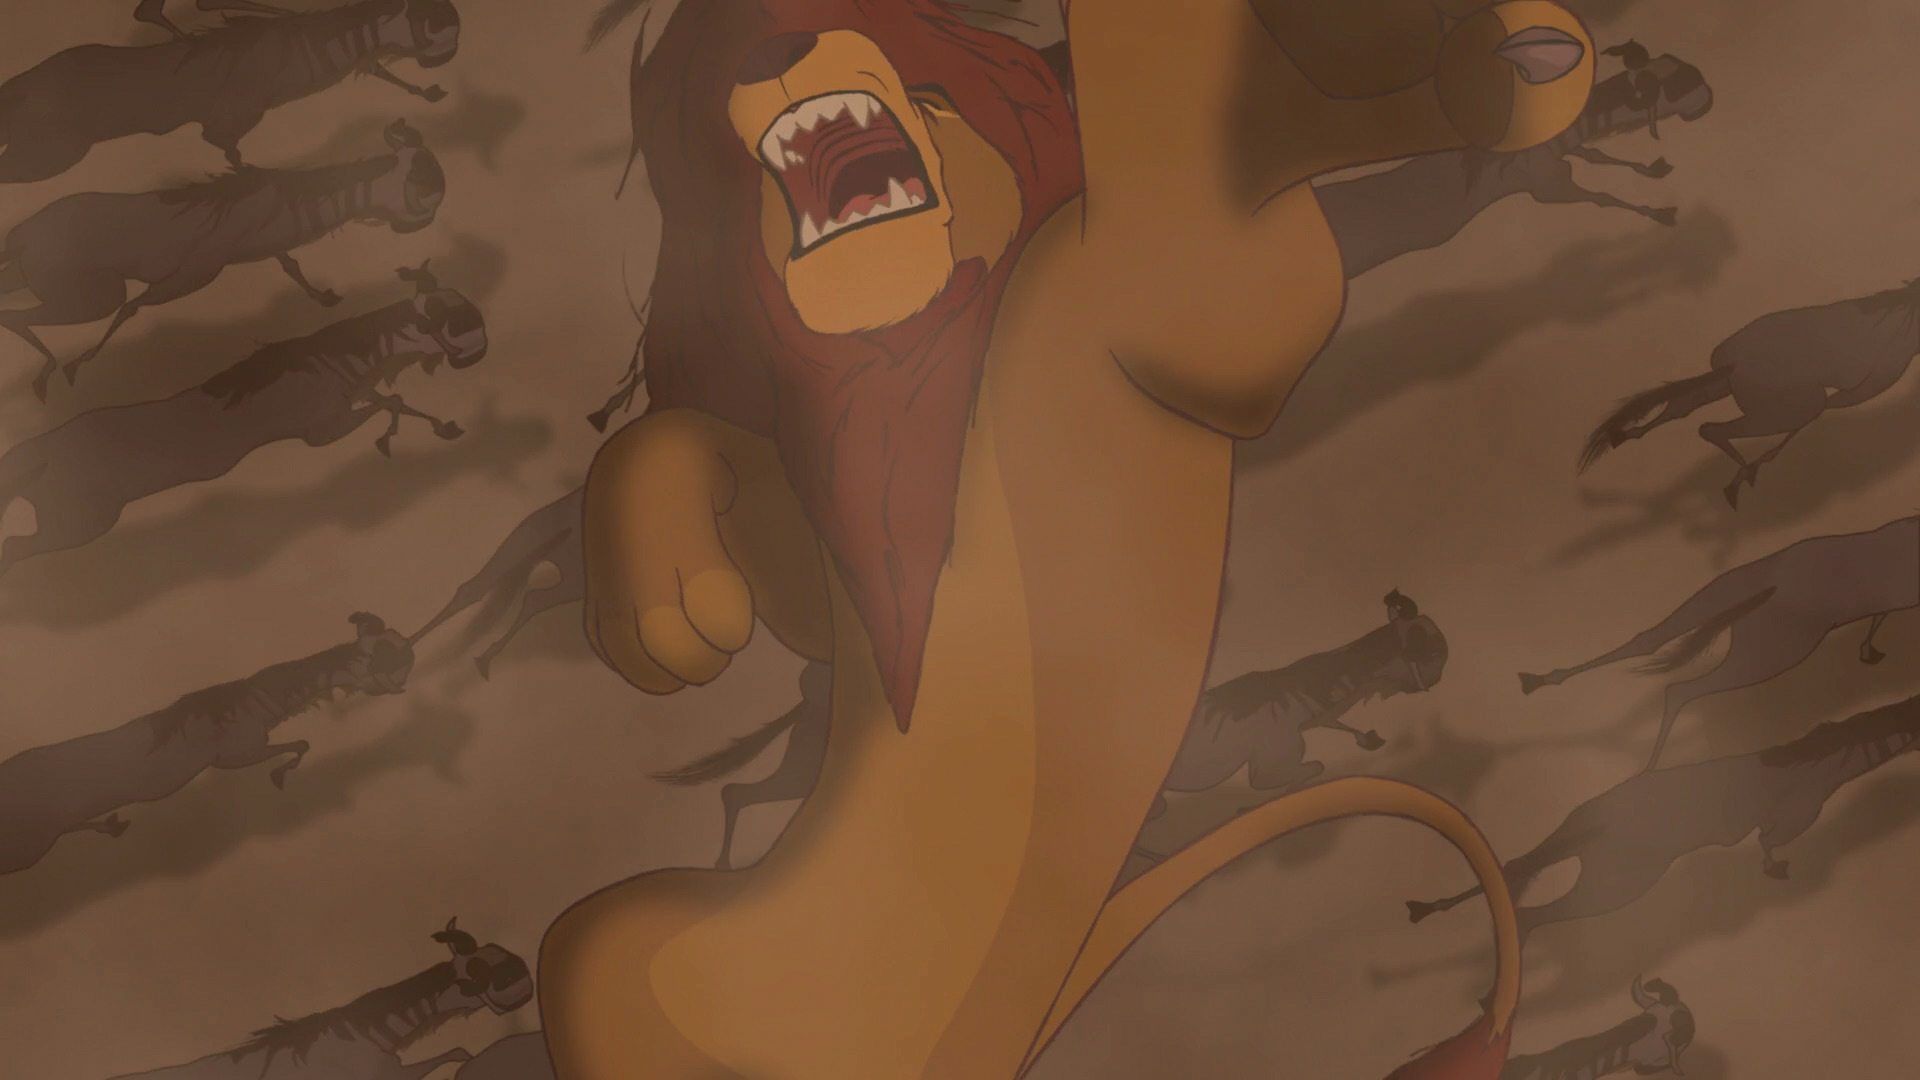 25 Extra Sweet Things You Never Noticed In The Lion King